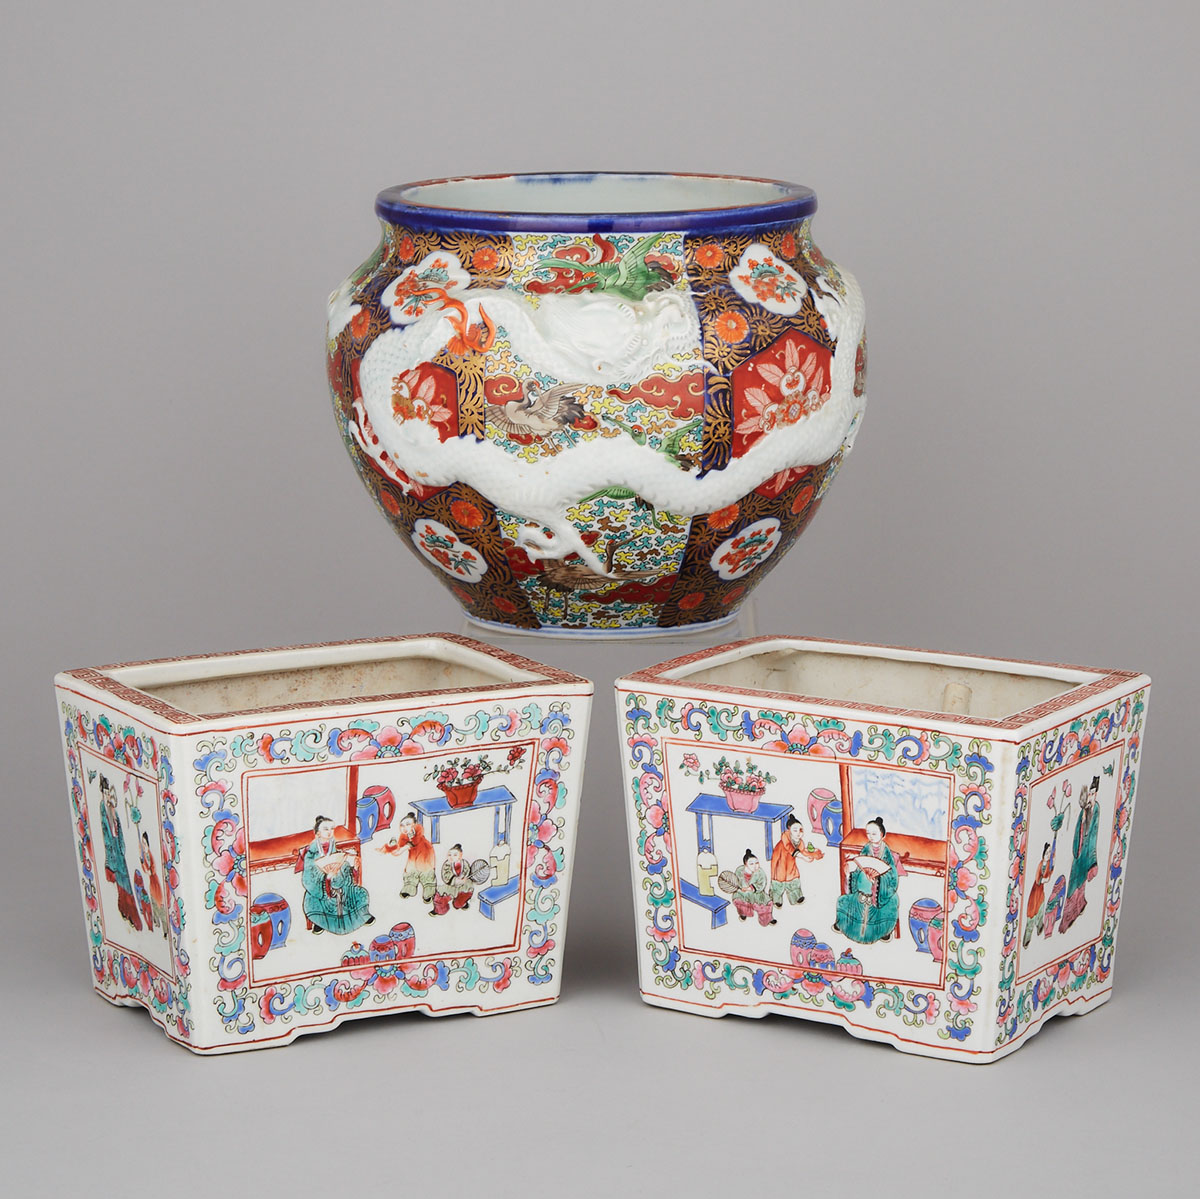 Pair of Chinese Porcelain Planters and Another, Japanese, 20th century